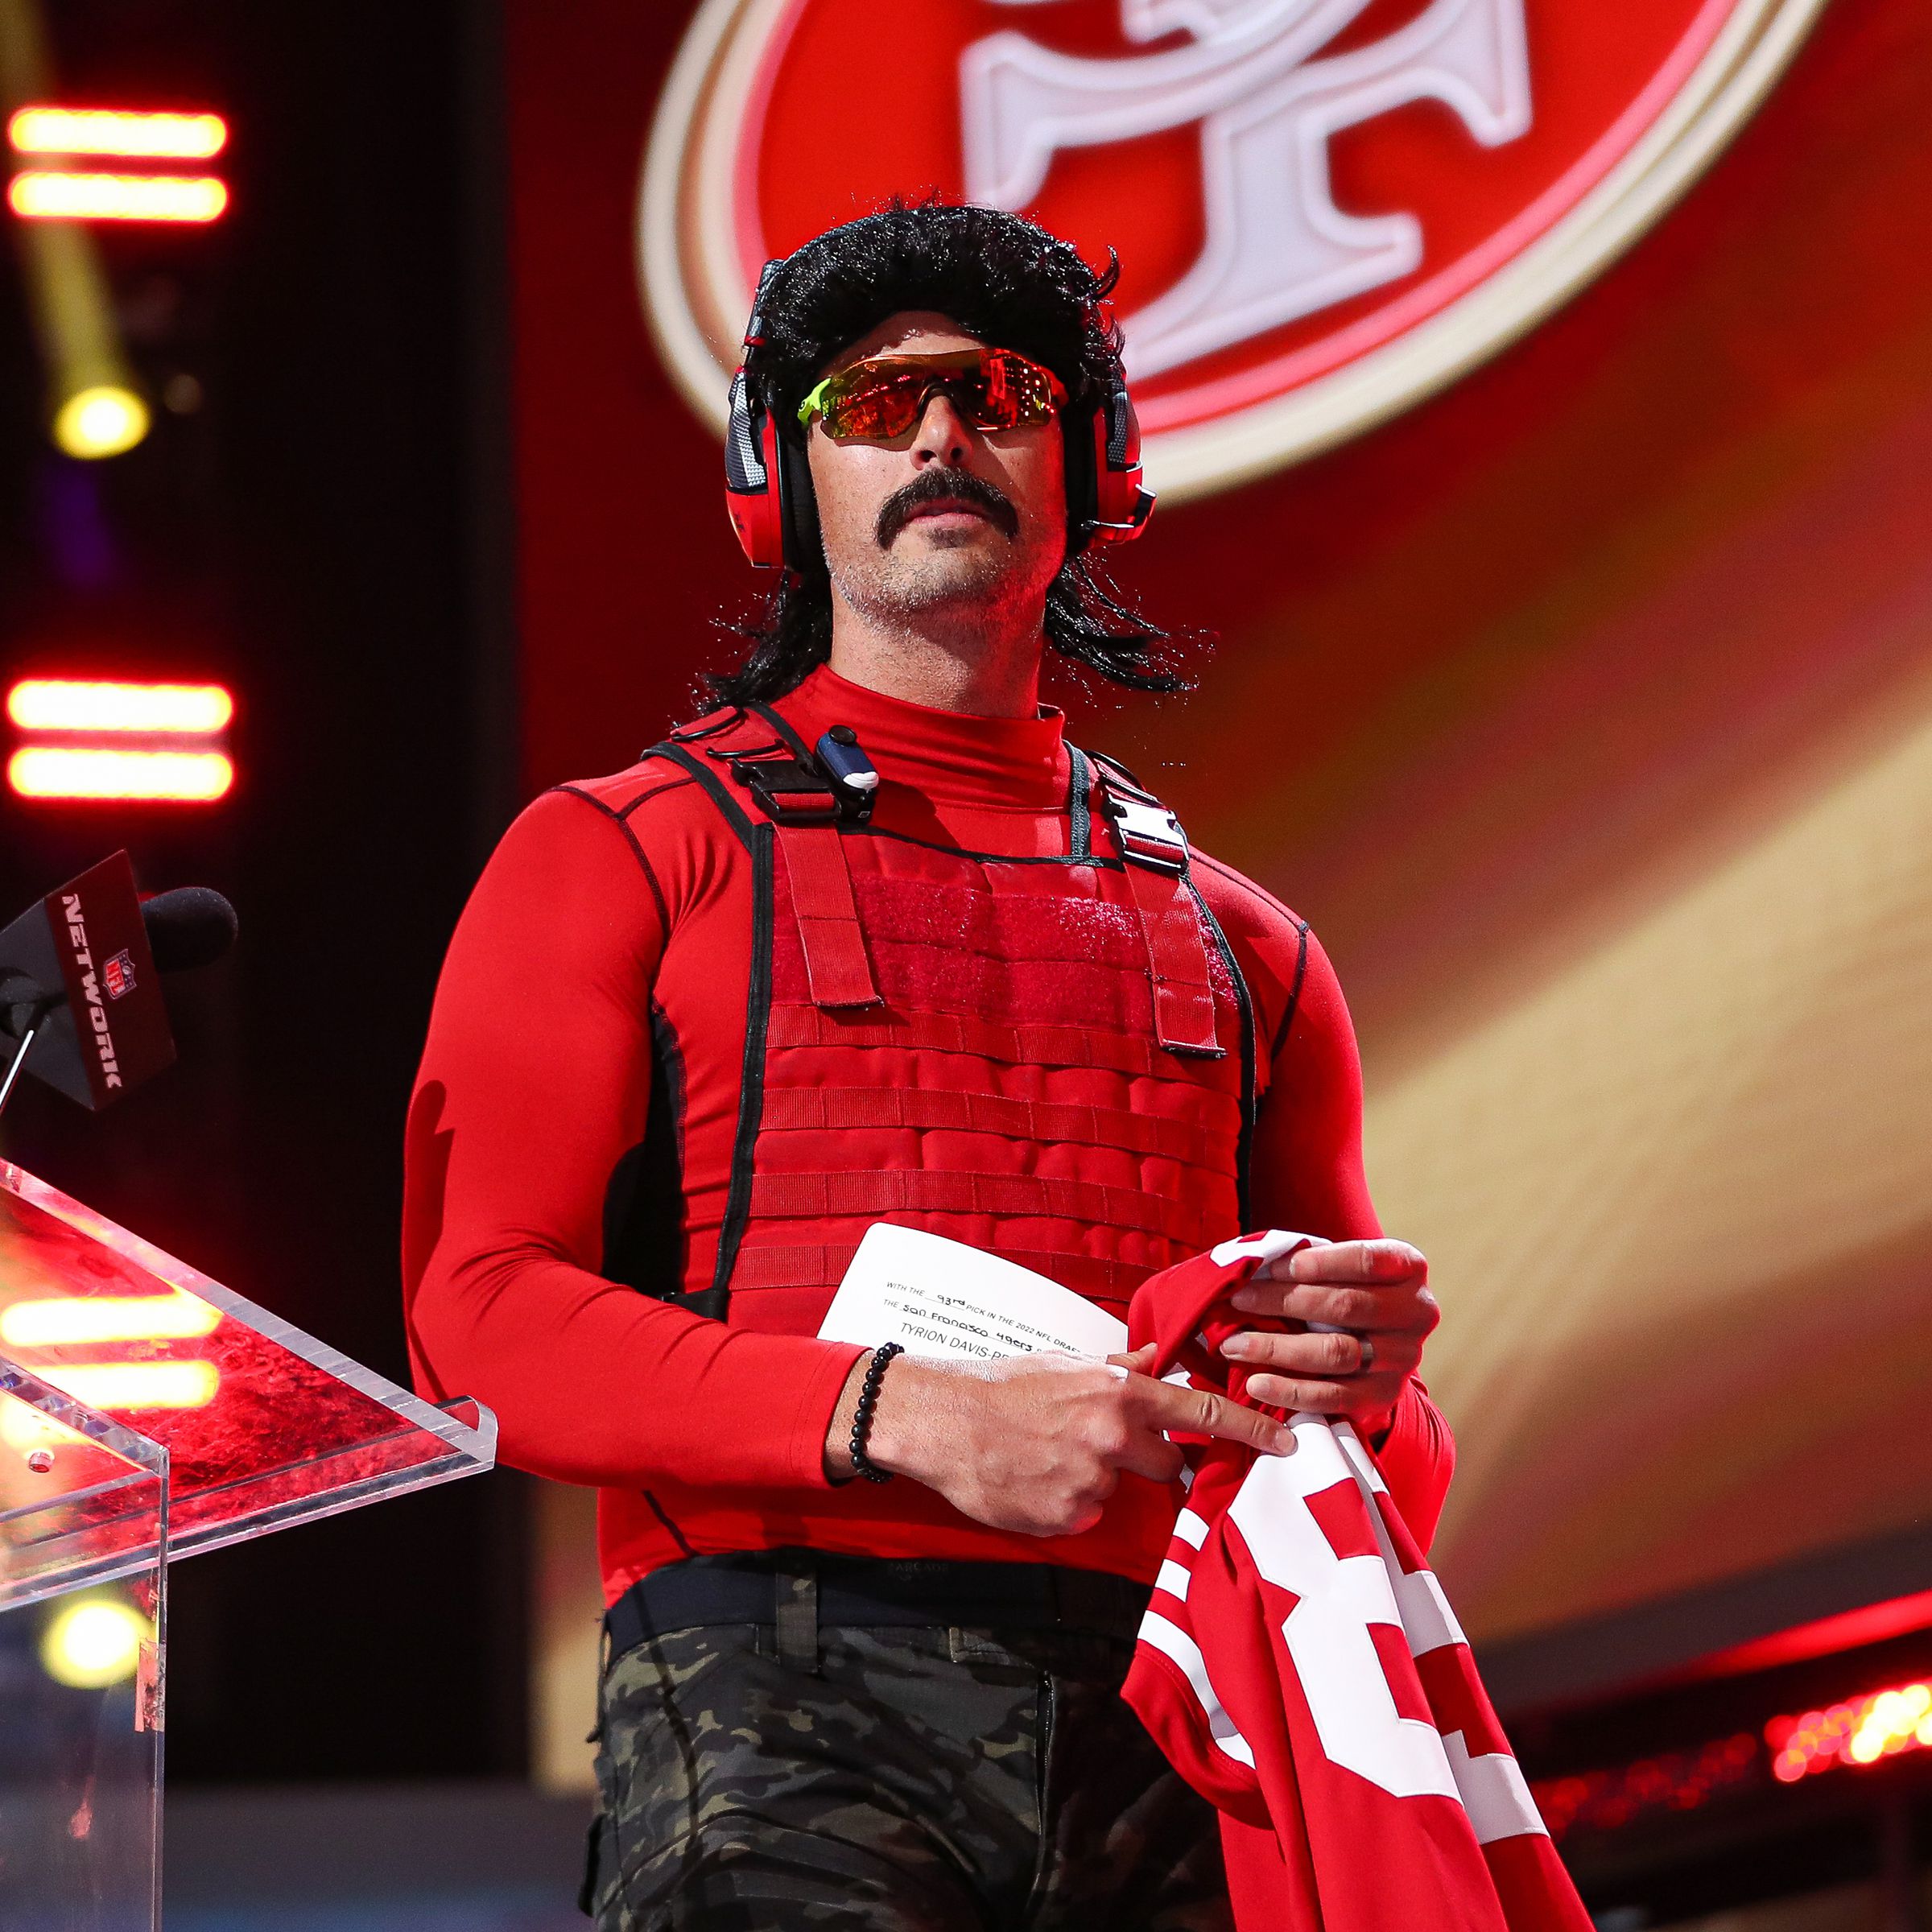 Video game streamer Dr. DisRespect presents on stage during round three of the 2022 NFL Draft on April 28th, 2022, in Las Vegas, Nevada.